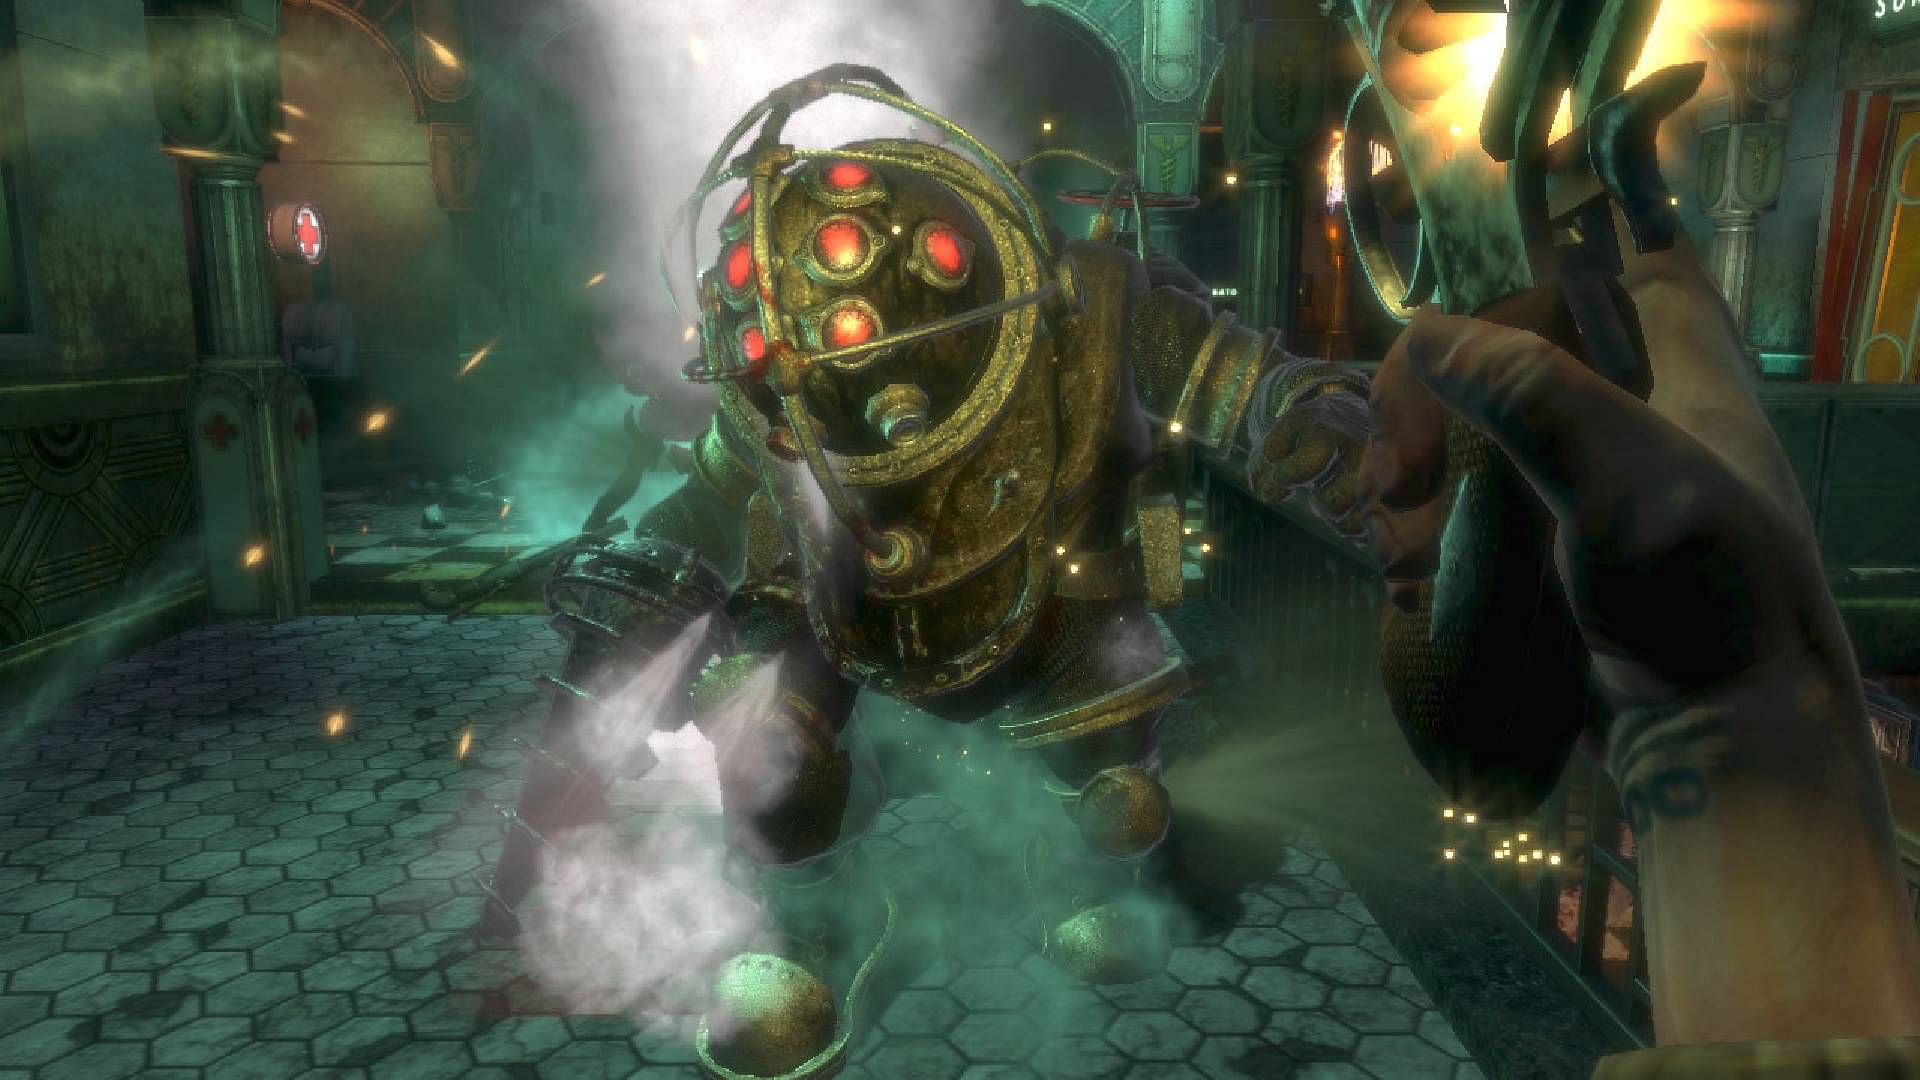 An image of a Big Daddy in Bioshock